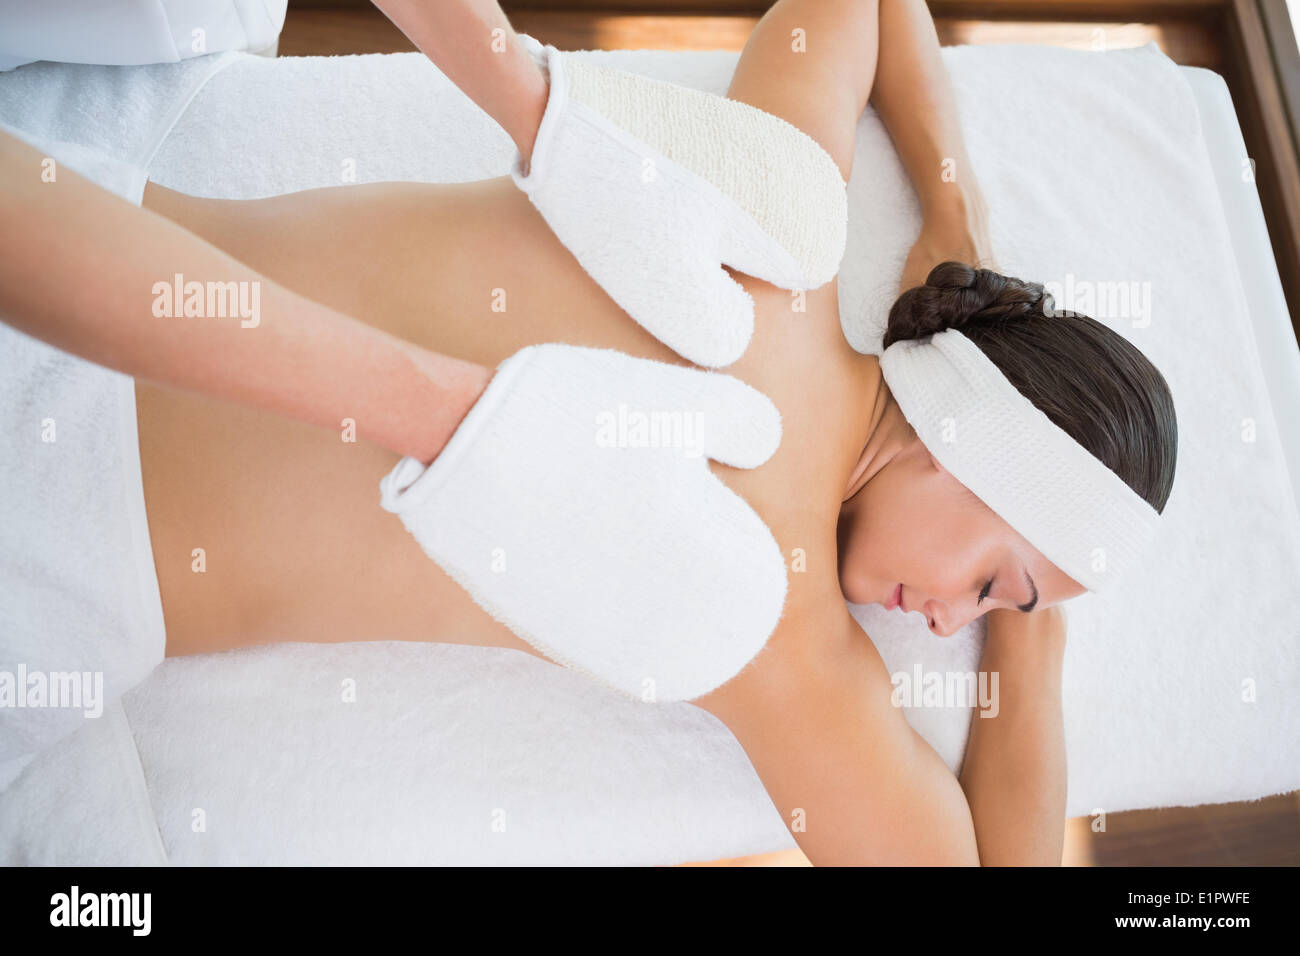 Beauty therapist rubbing womans back with heated mitts Stock Photo